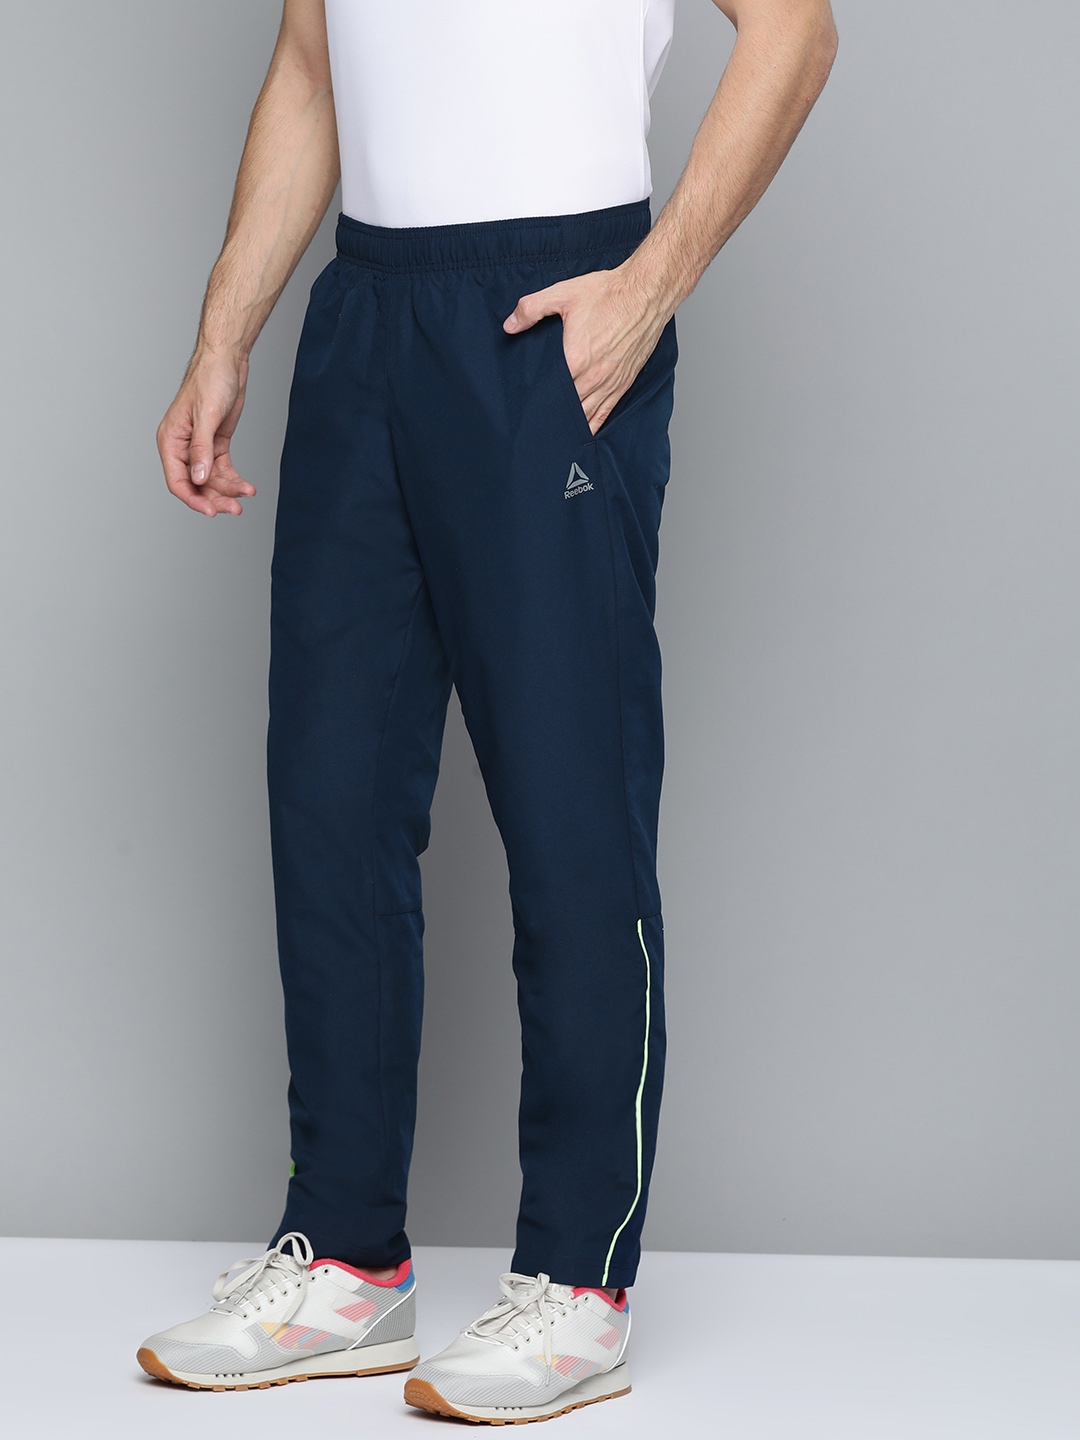 Reebok Pace W Pant Blue Training Track Pant L Buy Reebok Pace W Pant  Blue Training Track Pant L Online at Best Price in India  Nykaa